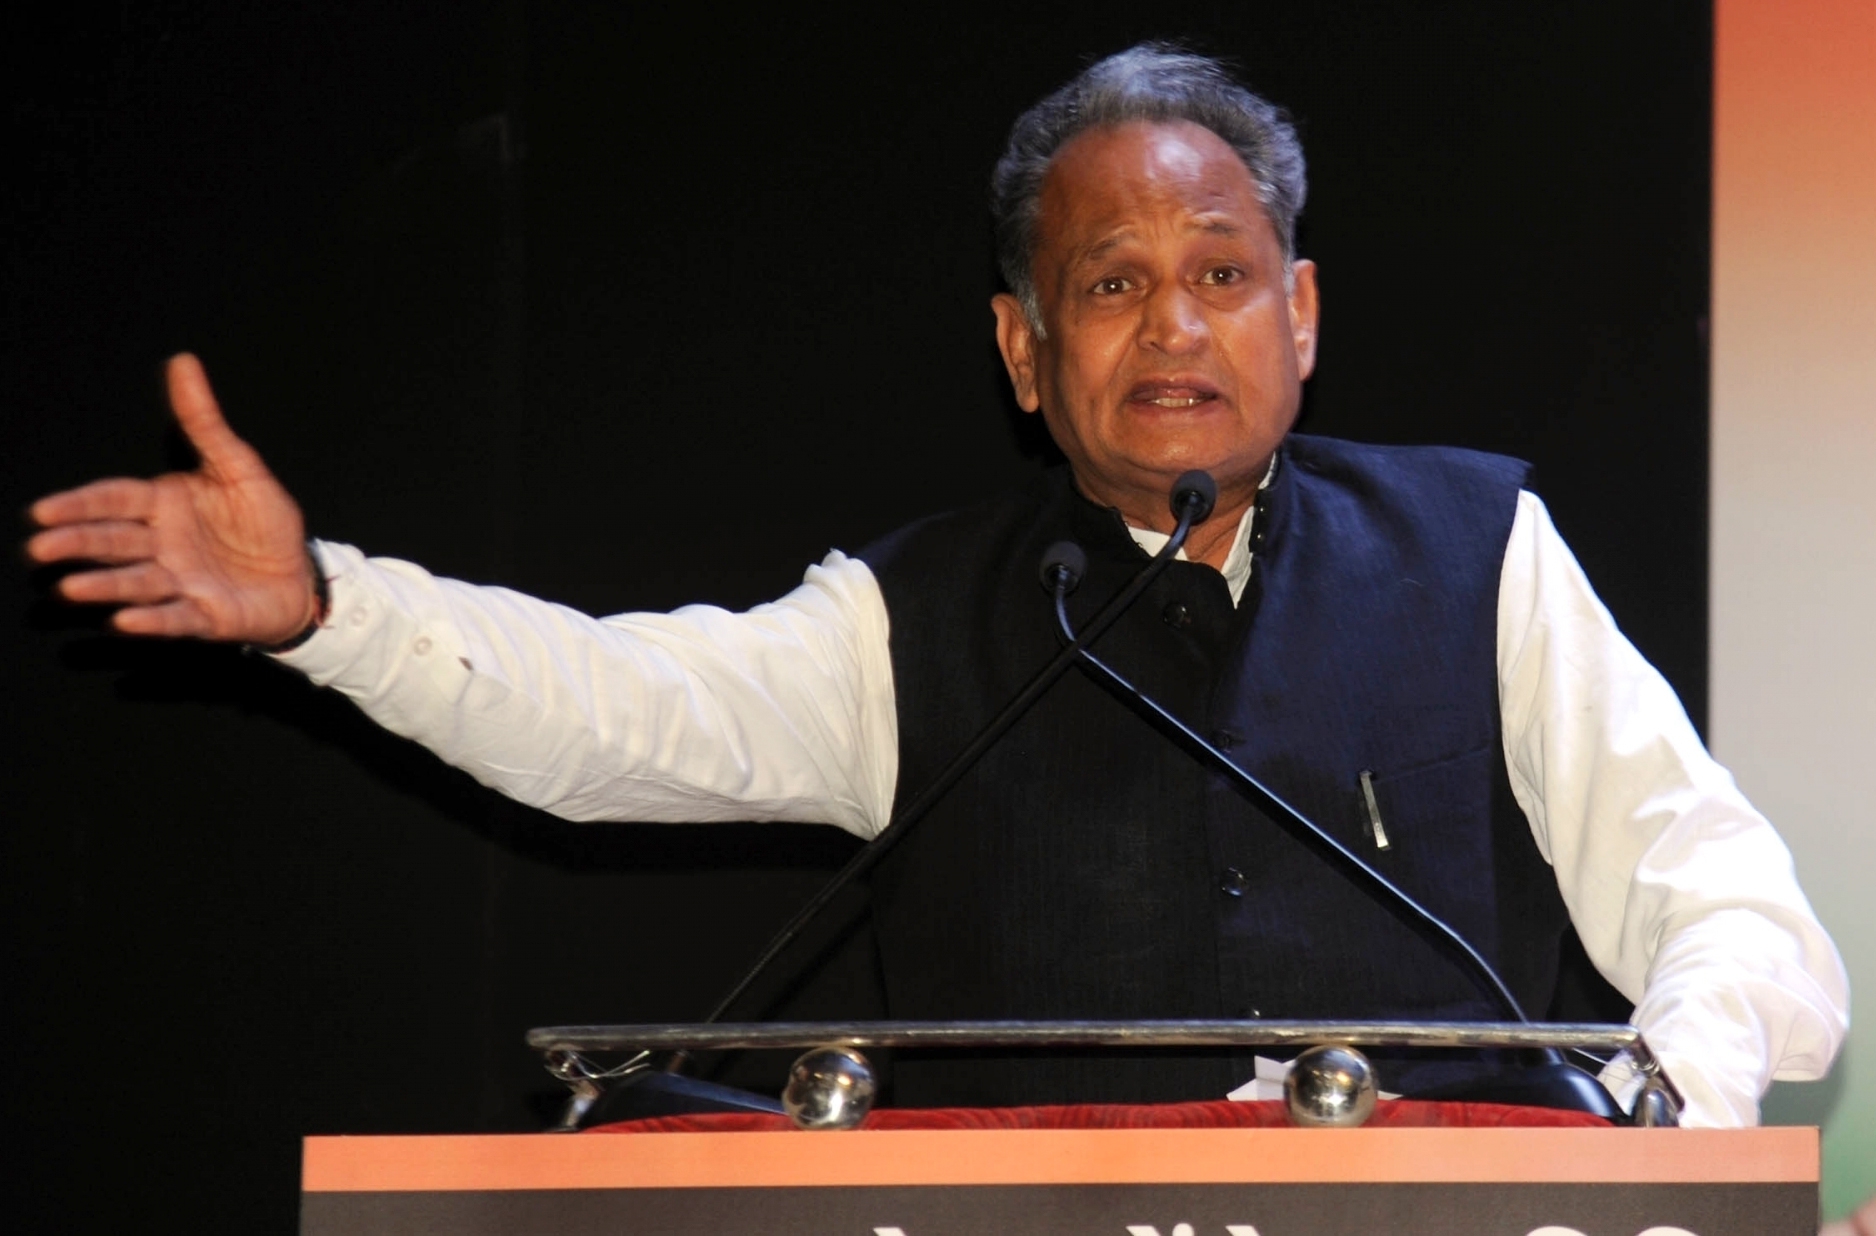 Gehlot reads out old budget